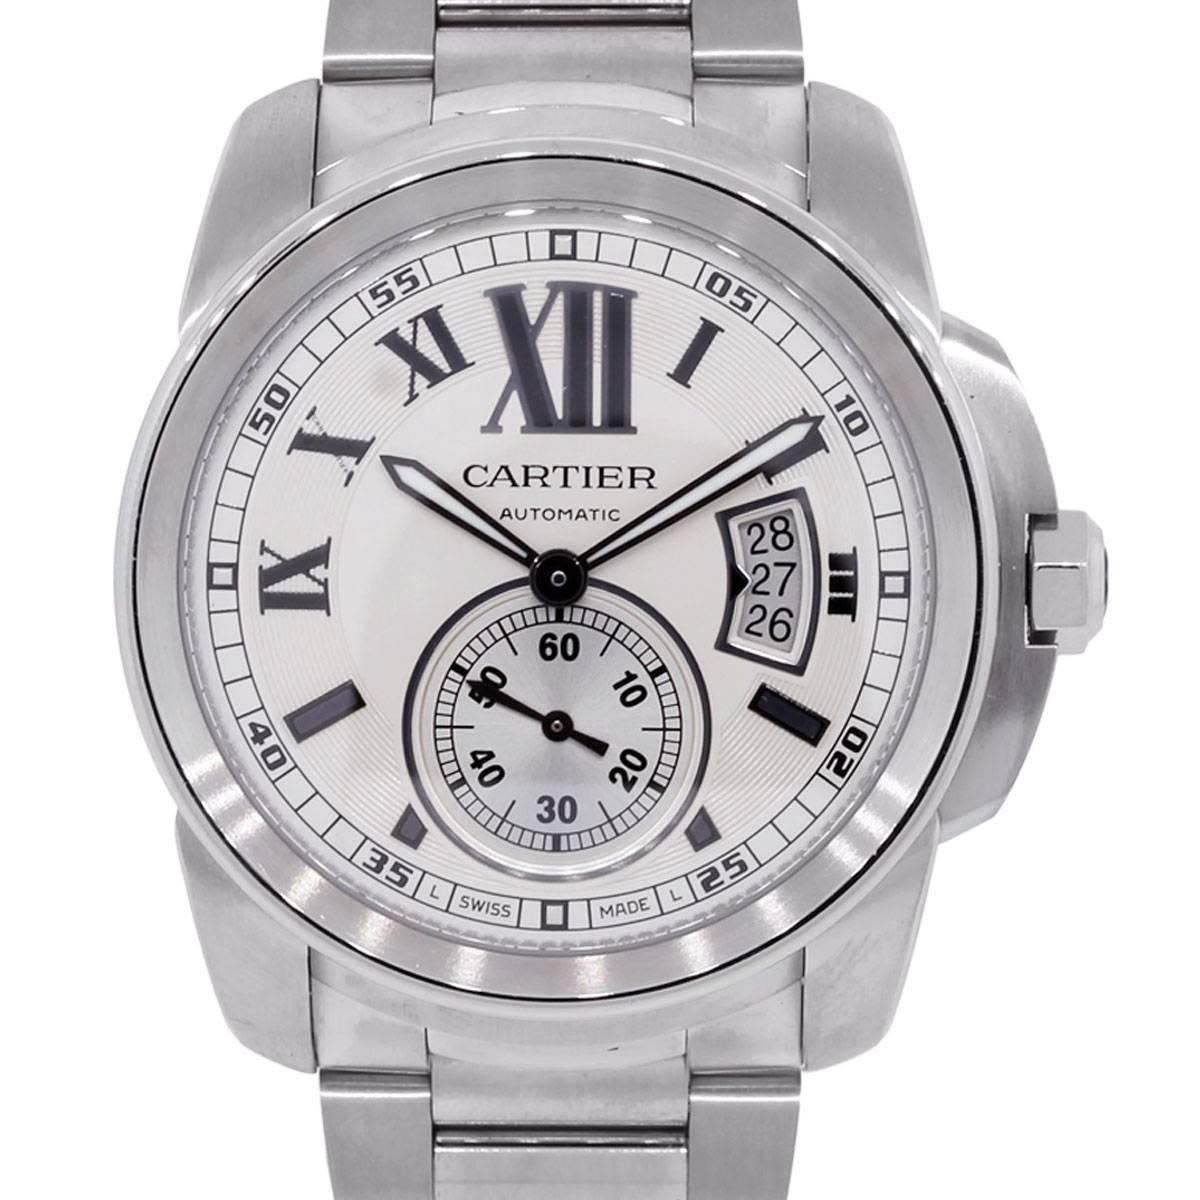 Cartier Stainless Steel Calibre Silvered Dial Automatic Wristwatch